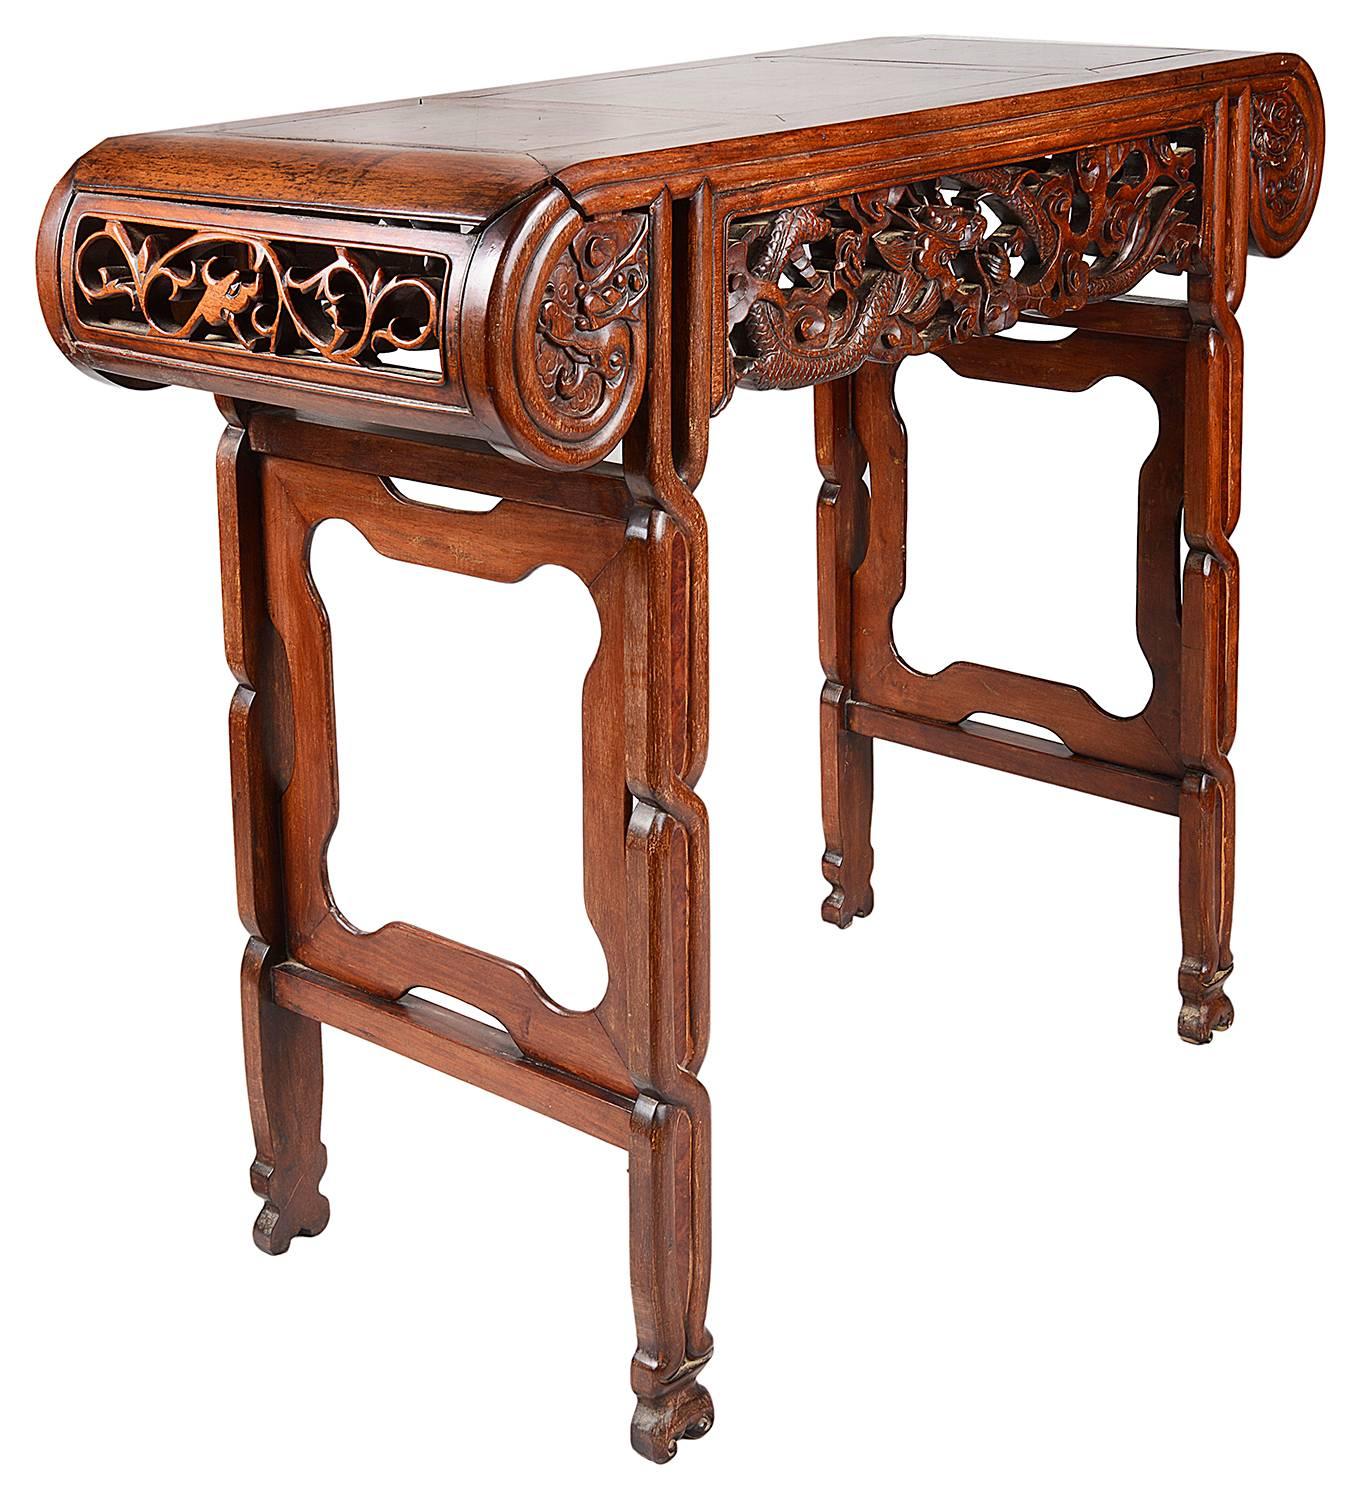 A good quality 19th century Chinese hardwood alter table, having a three panelled burr wood top. Carved scrolling ends with foliate decoration, the frieze with carved mythical dragons entwined. Raised in end supports with stretchers between and